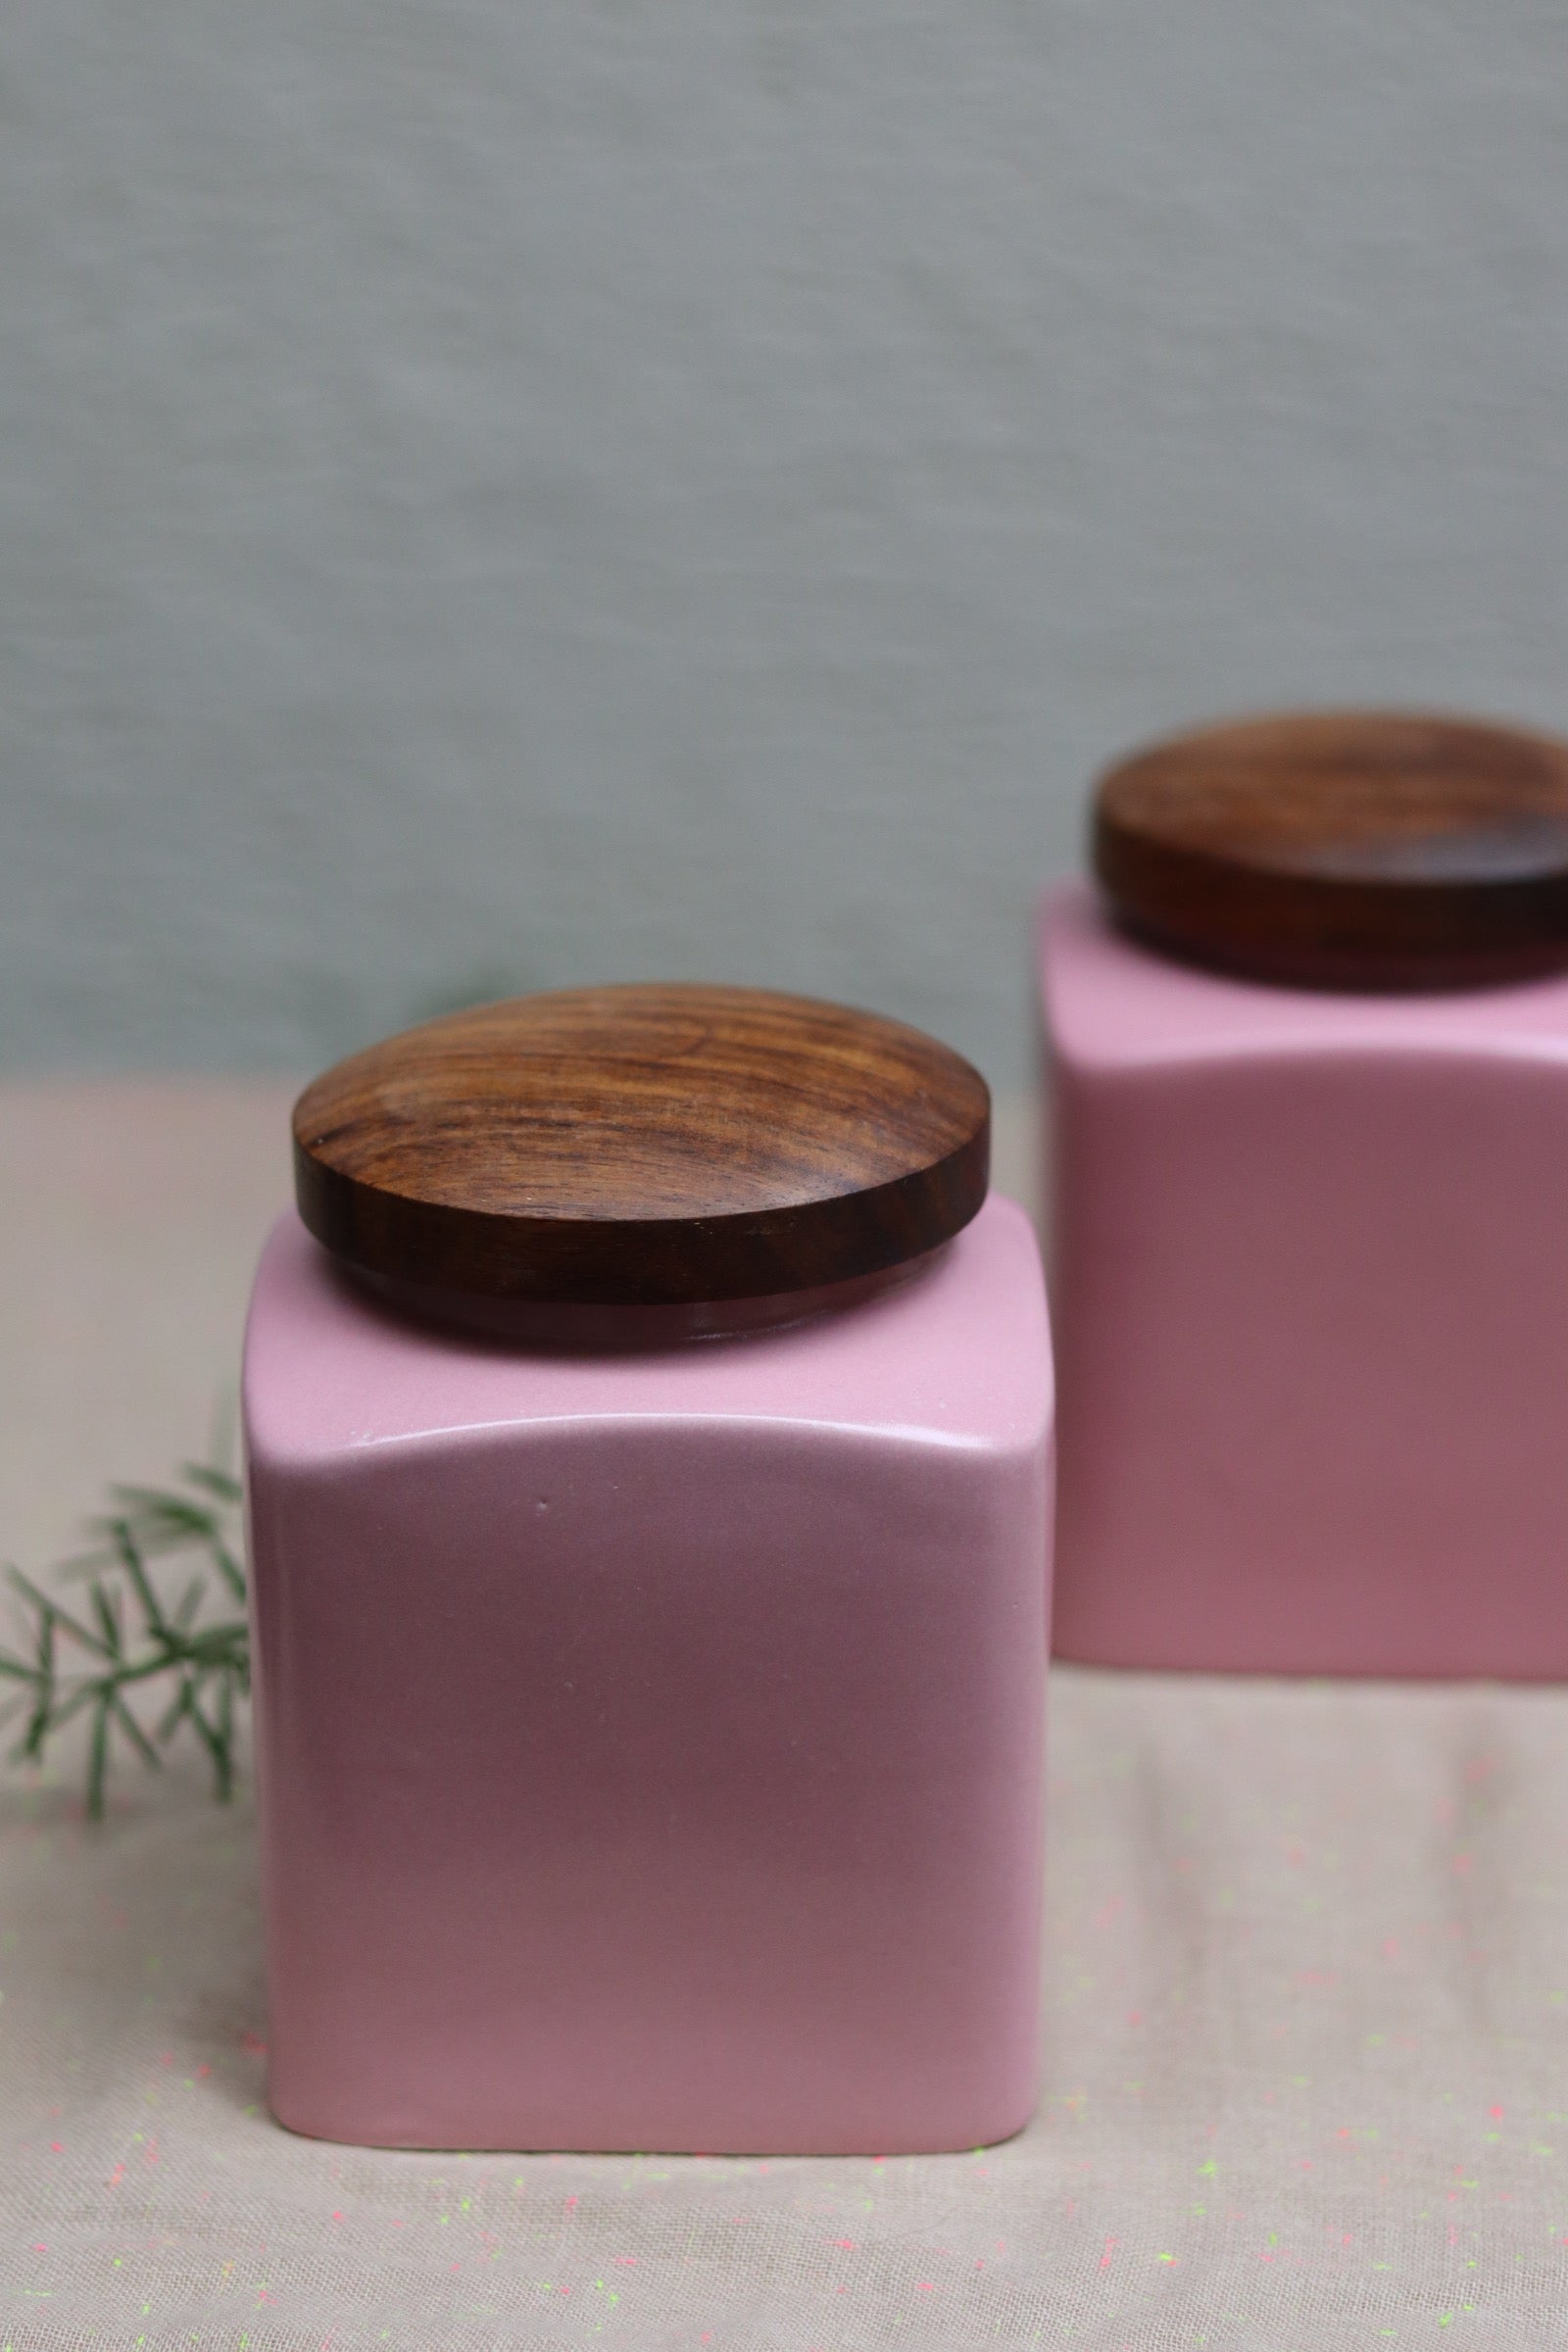 Handmade ceramic square jars with wooden lid